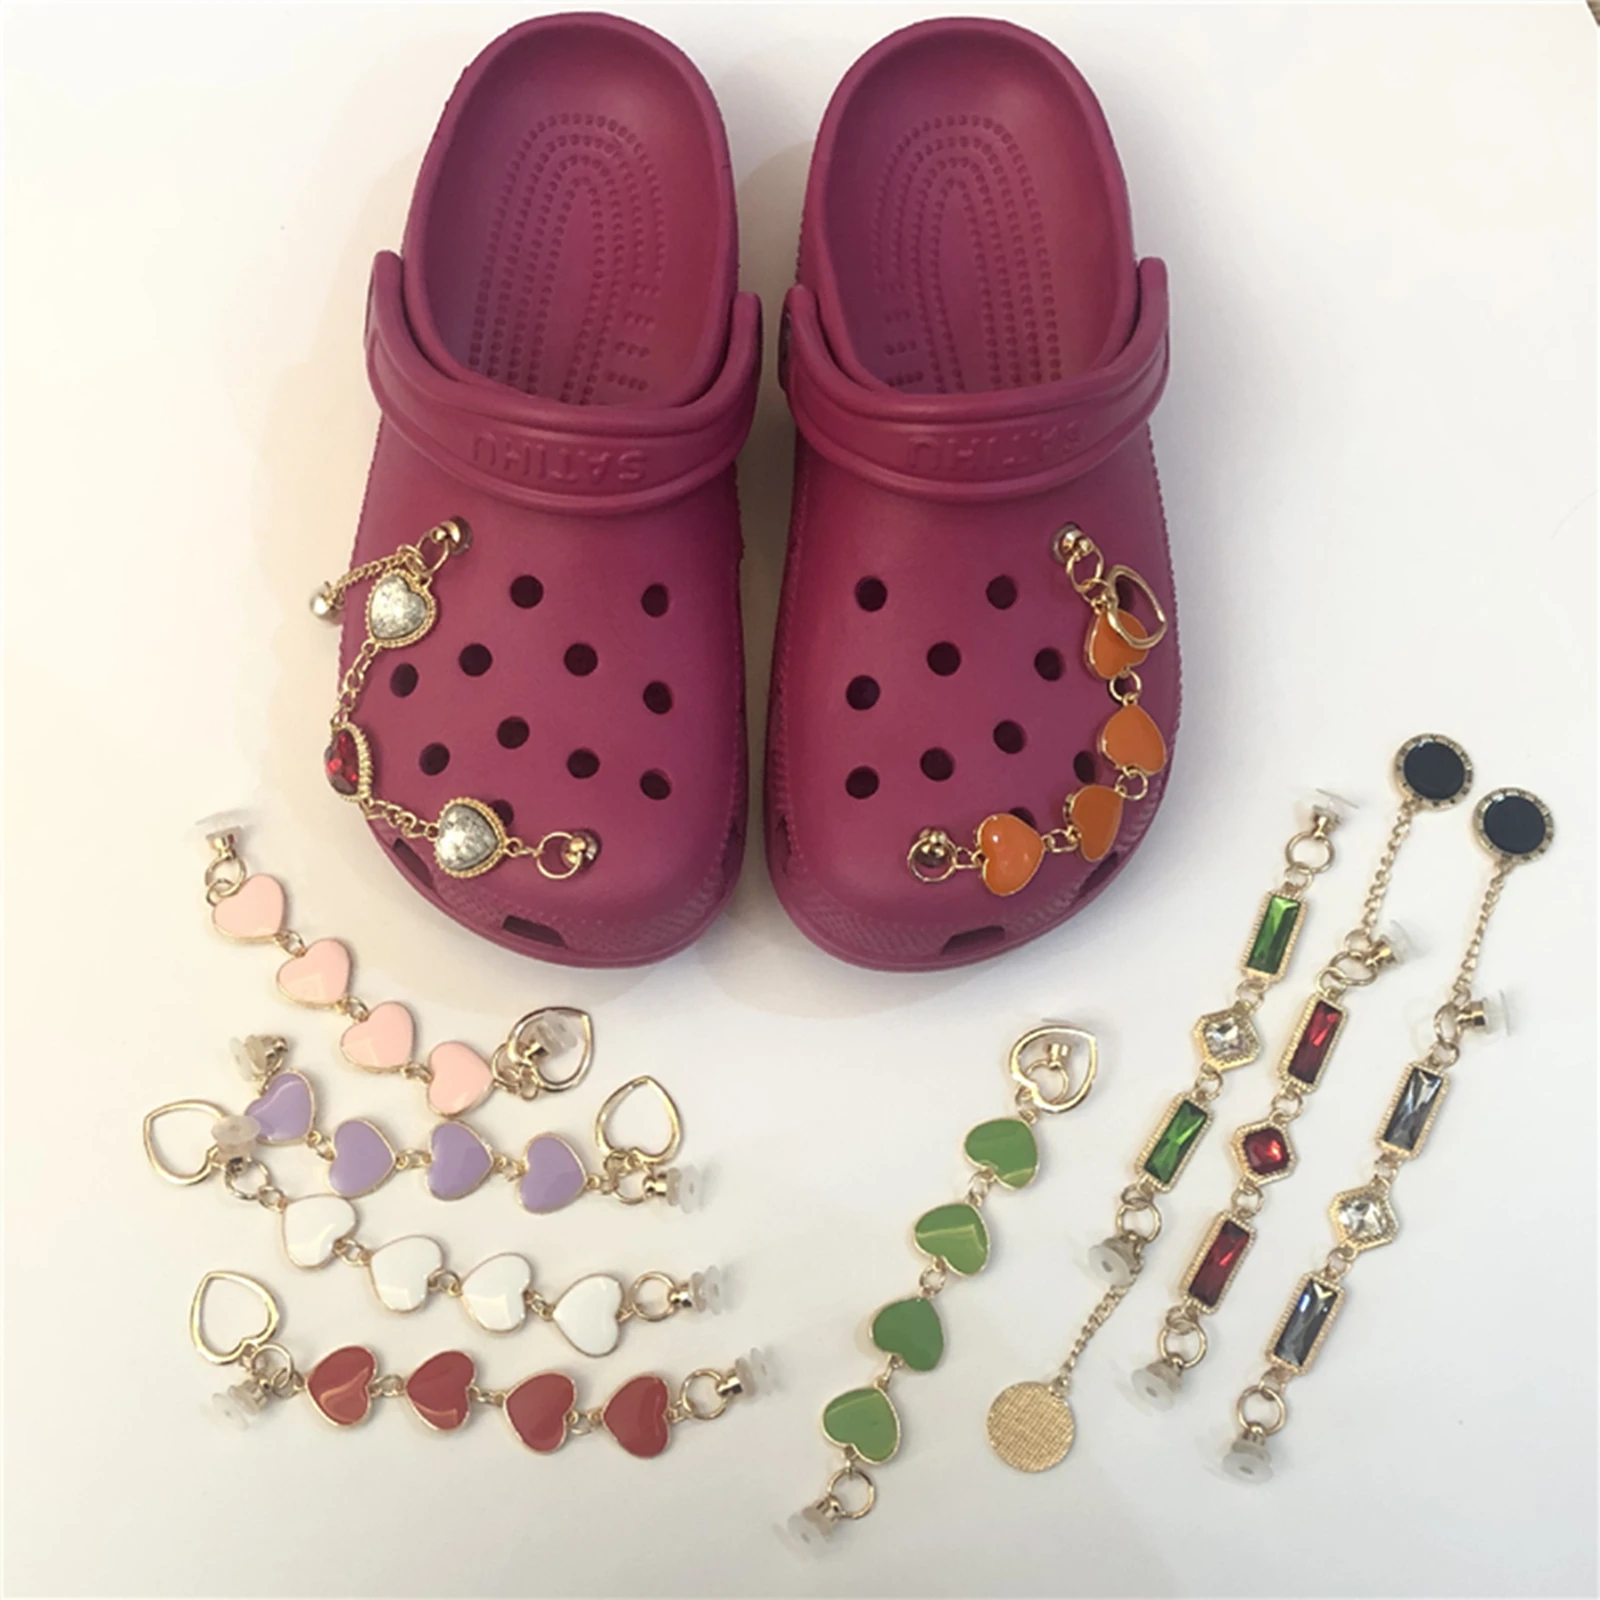 Silver Metal with Chain Charms Clog Sandals Pins Accessories decorations for Girls Adult Women Shoes Gift HI-REEKE Chains For Crocs shoe charm 